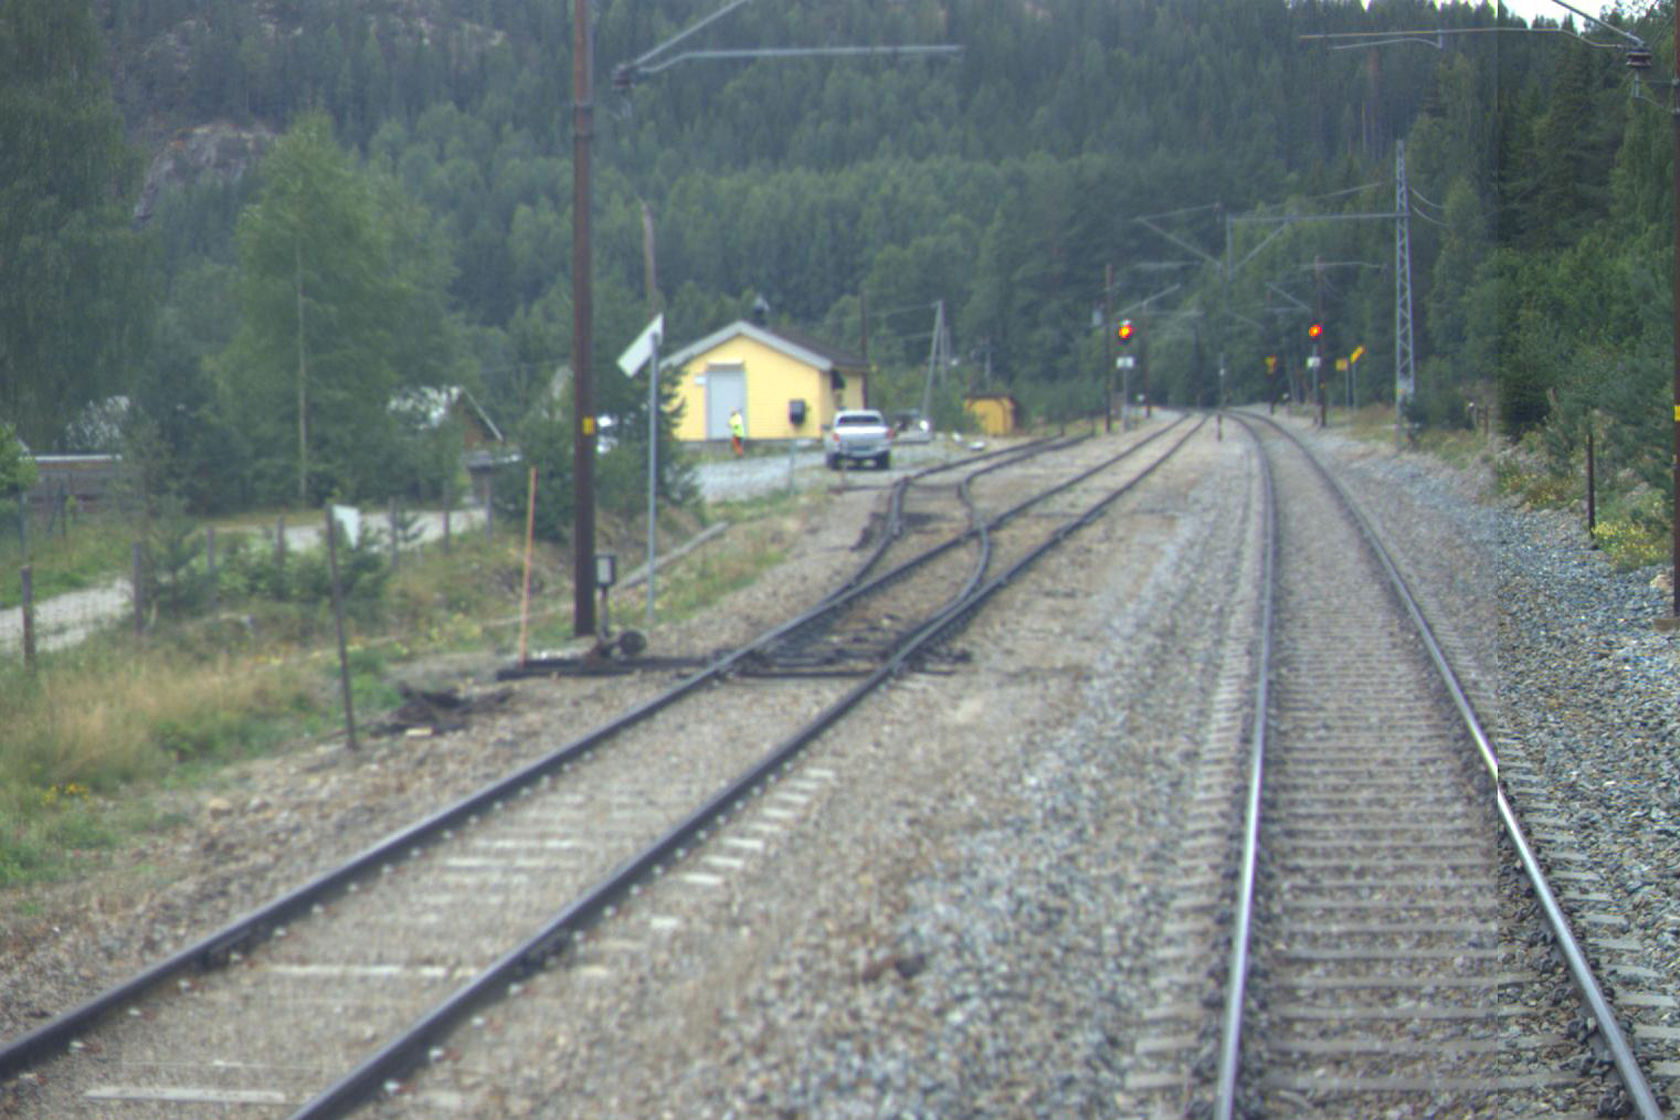 Tracks and station building at Bergheim station